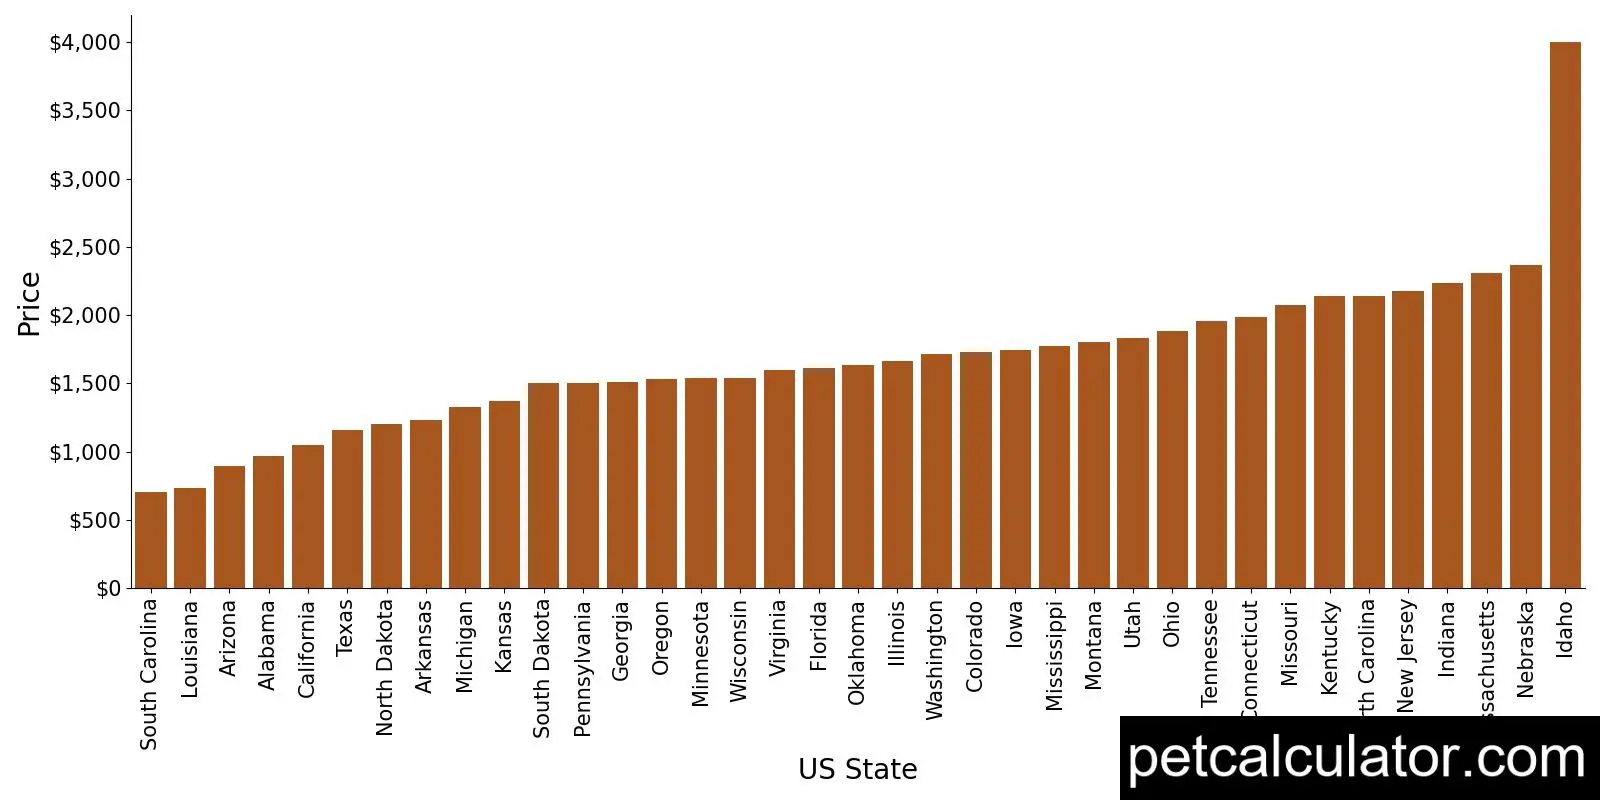 Price of Pug by US State 